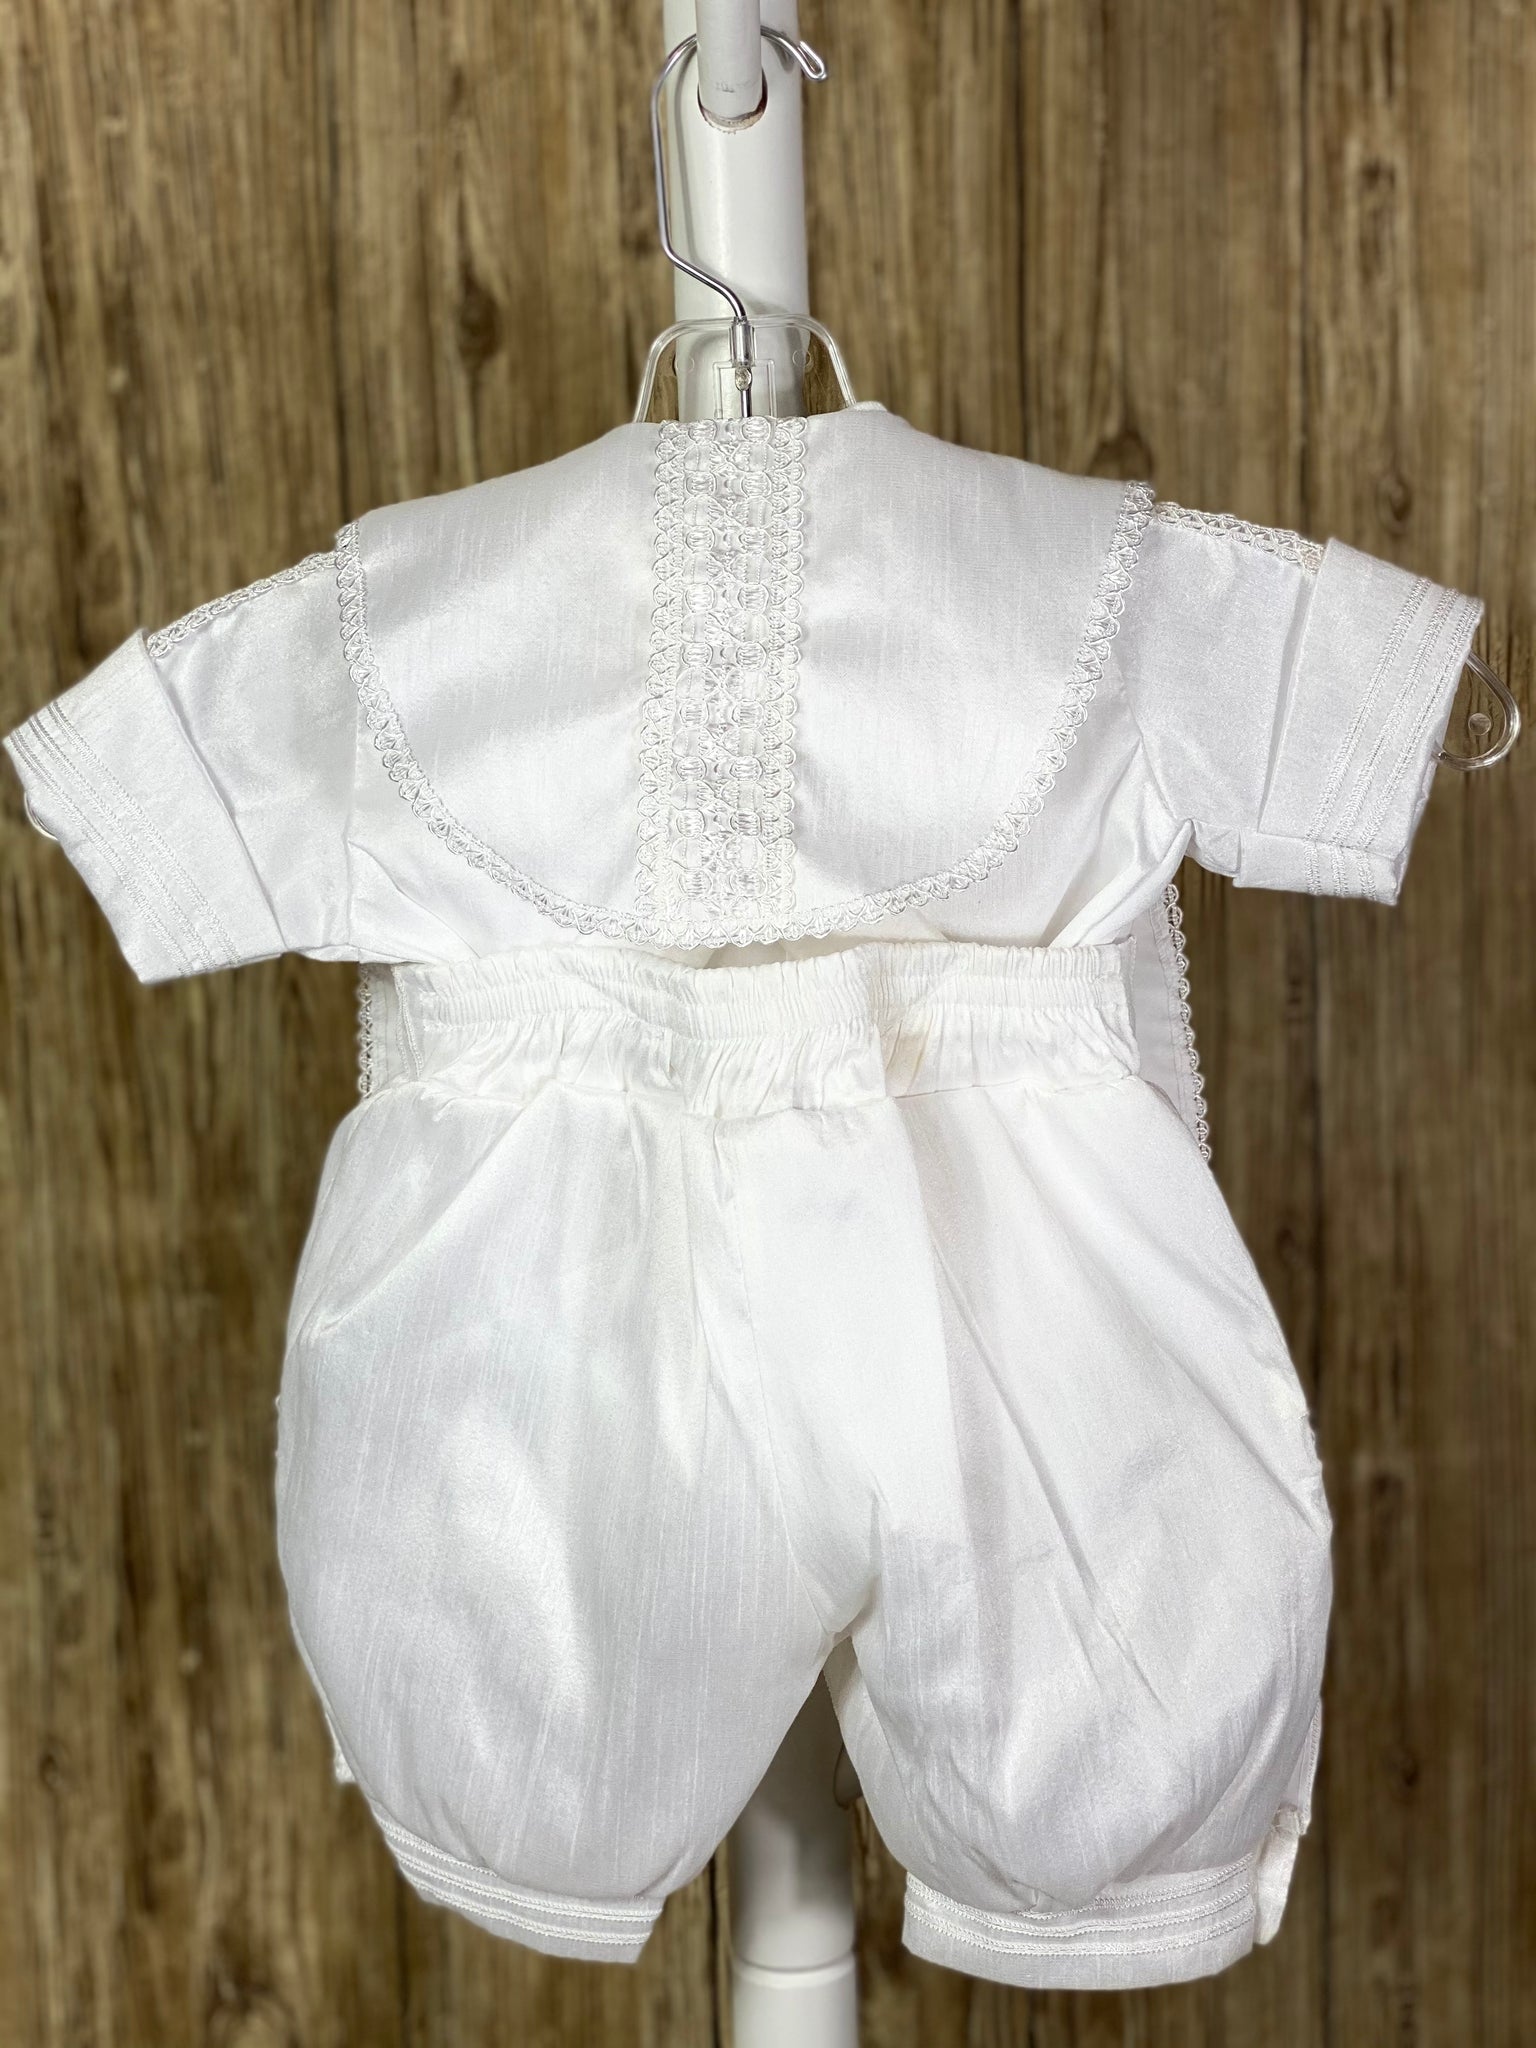 White, size 6M  4-piece set including Shirt, pants, stole, beret Collared shirt with short sleeves Buttoning on pant cuffs Elastic banding behind pants Button closure on back of shirt Thin trim striping pant legs, arm cuffs, stole, and cummerbund Crochet crosses on both sides of stole with rhinestone detailing Intricate lace ribbon down both sides of stole, beret, shirt bodice, and arms. Braided ribbon for stole closure